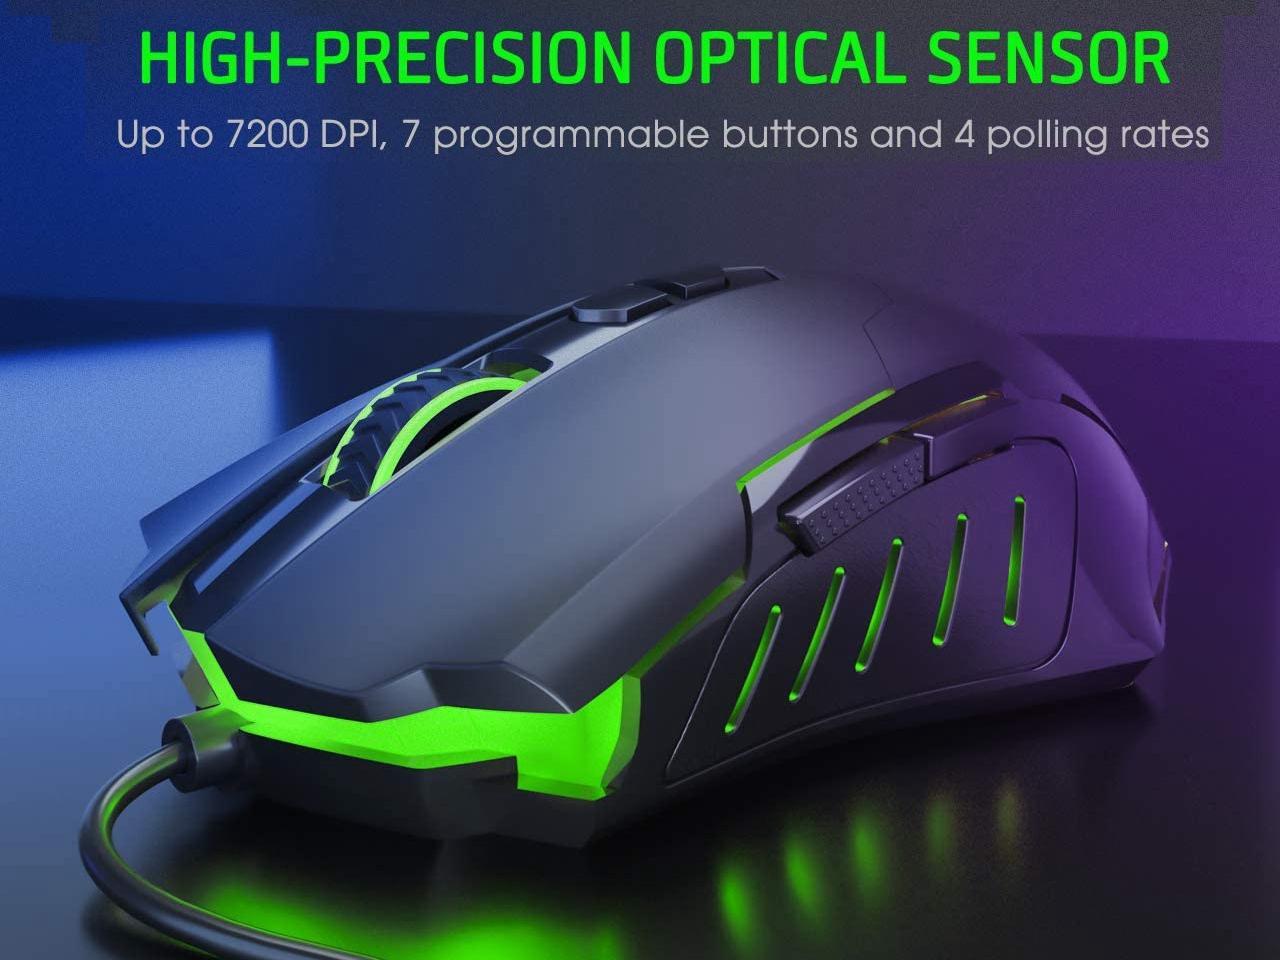 Ergonomic 7-Speed Variable-Speed Optical Gaming Mouse with Breathing Light USB Wired Mouse 